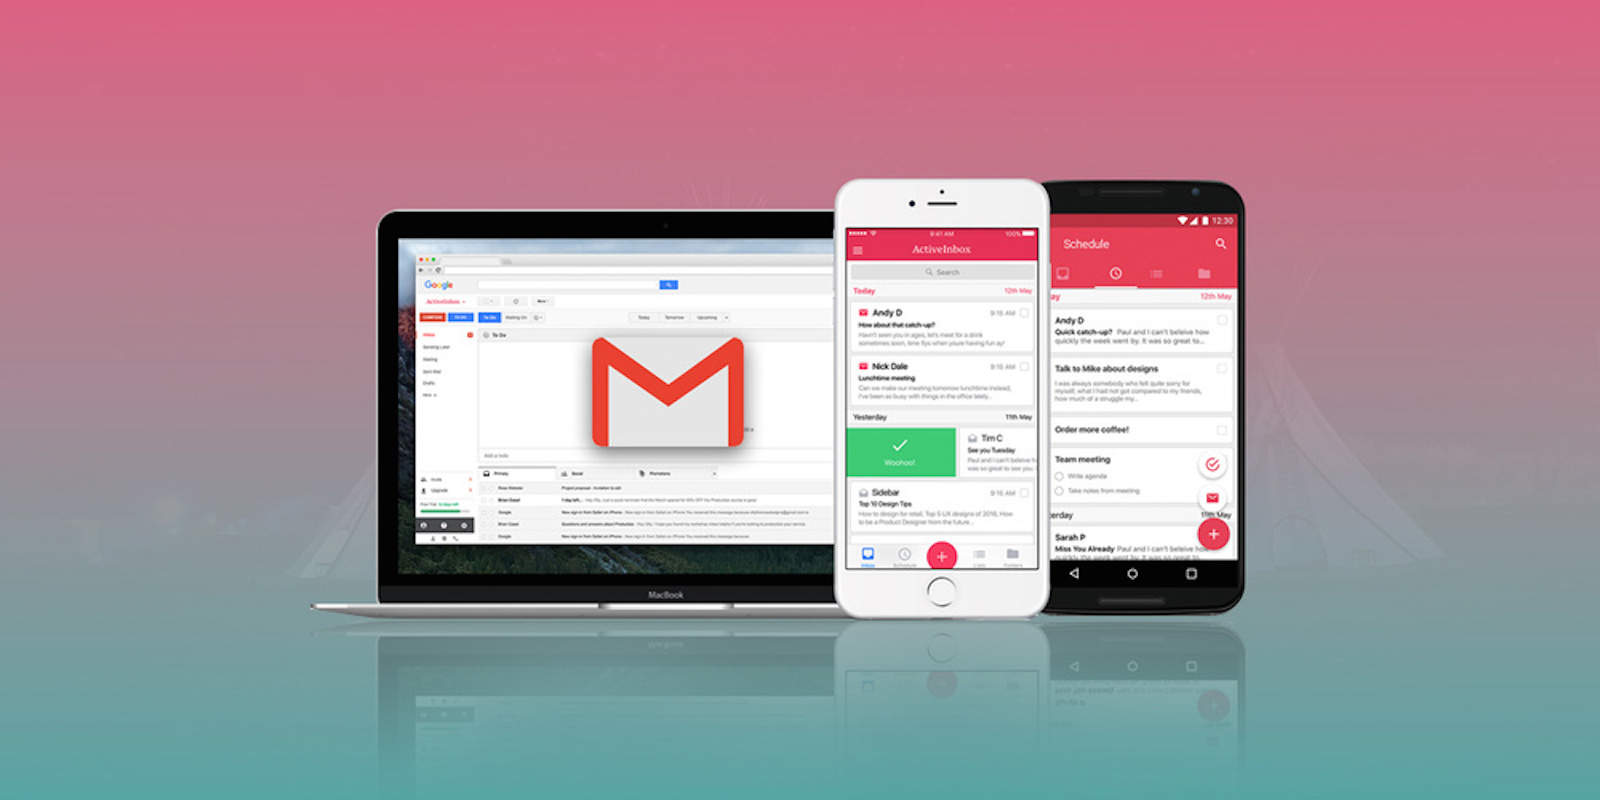 ActiveInbox adds a crucial layer of organization to your chaotic Gmail inbox.